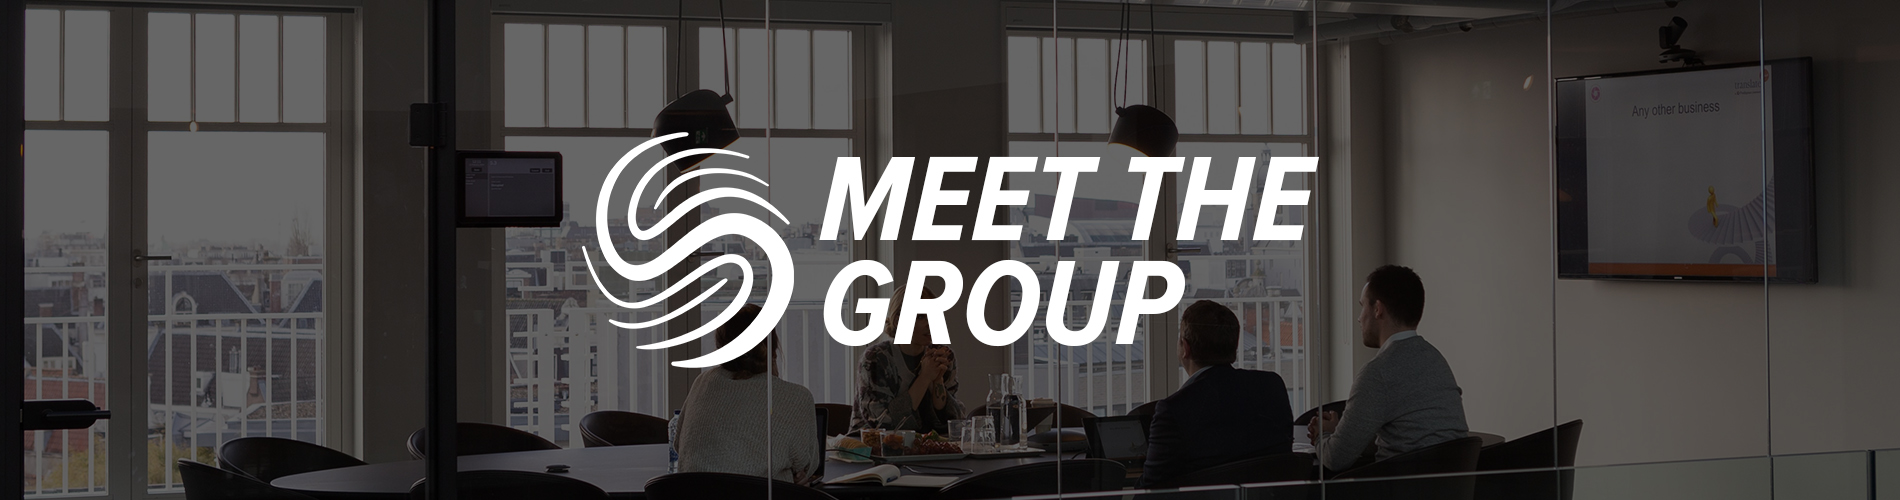 Meet the Group, Specialized Recruiting in Phoenix, Arizona